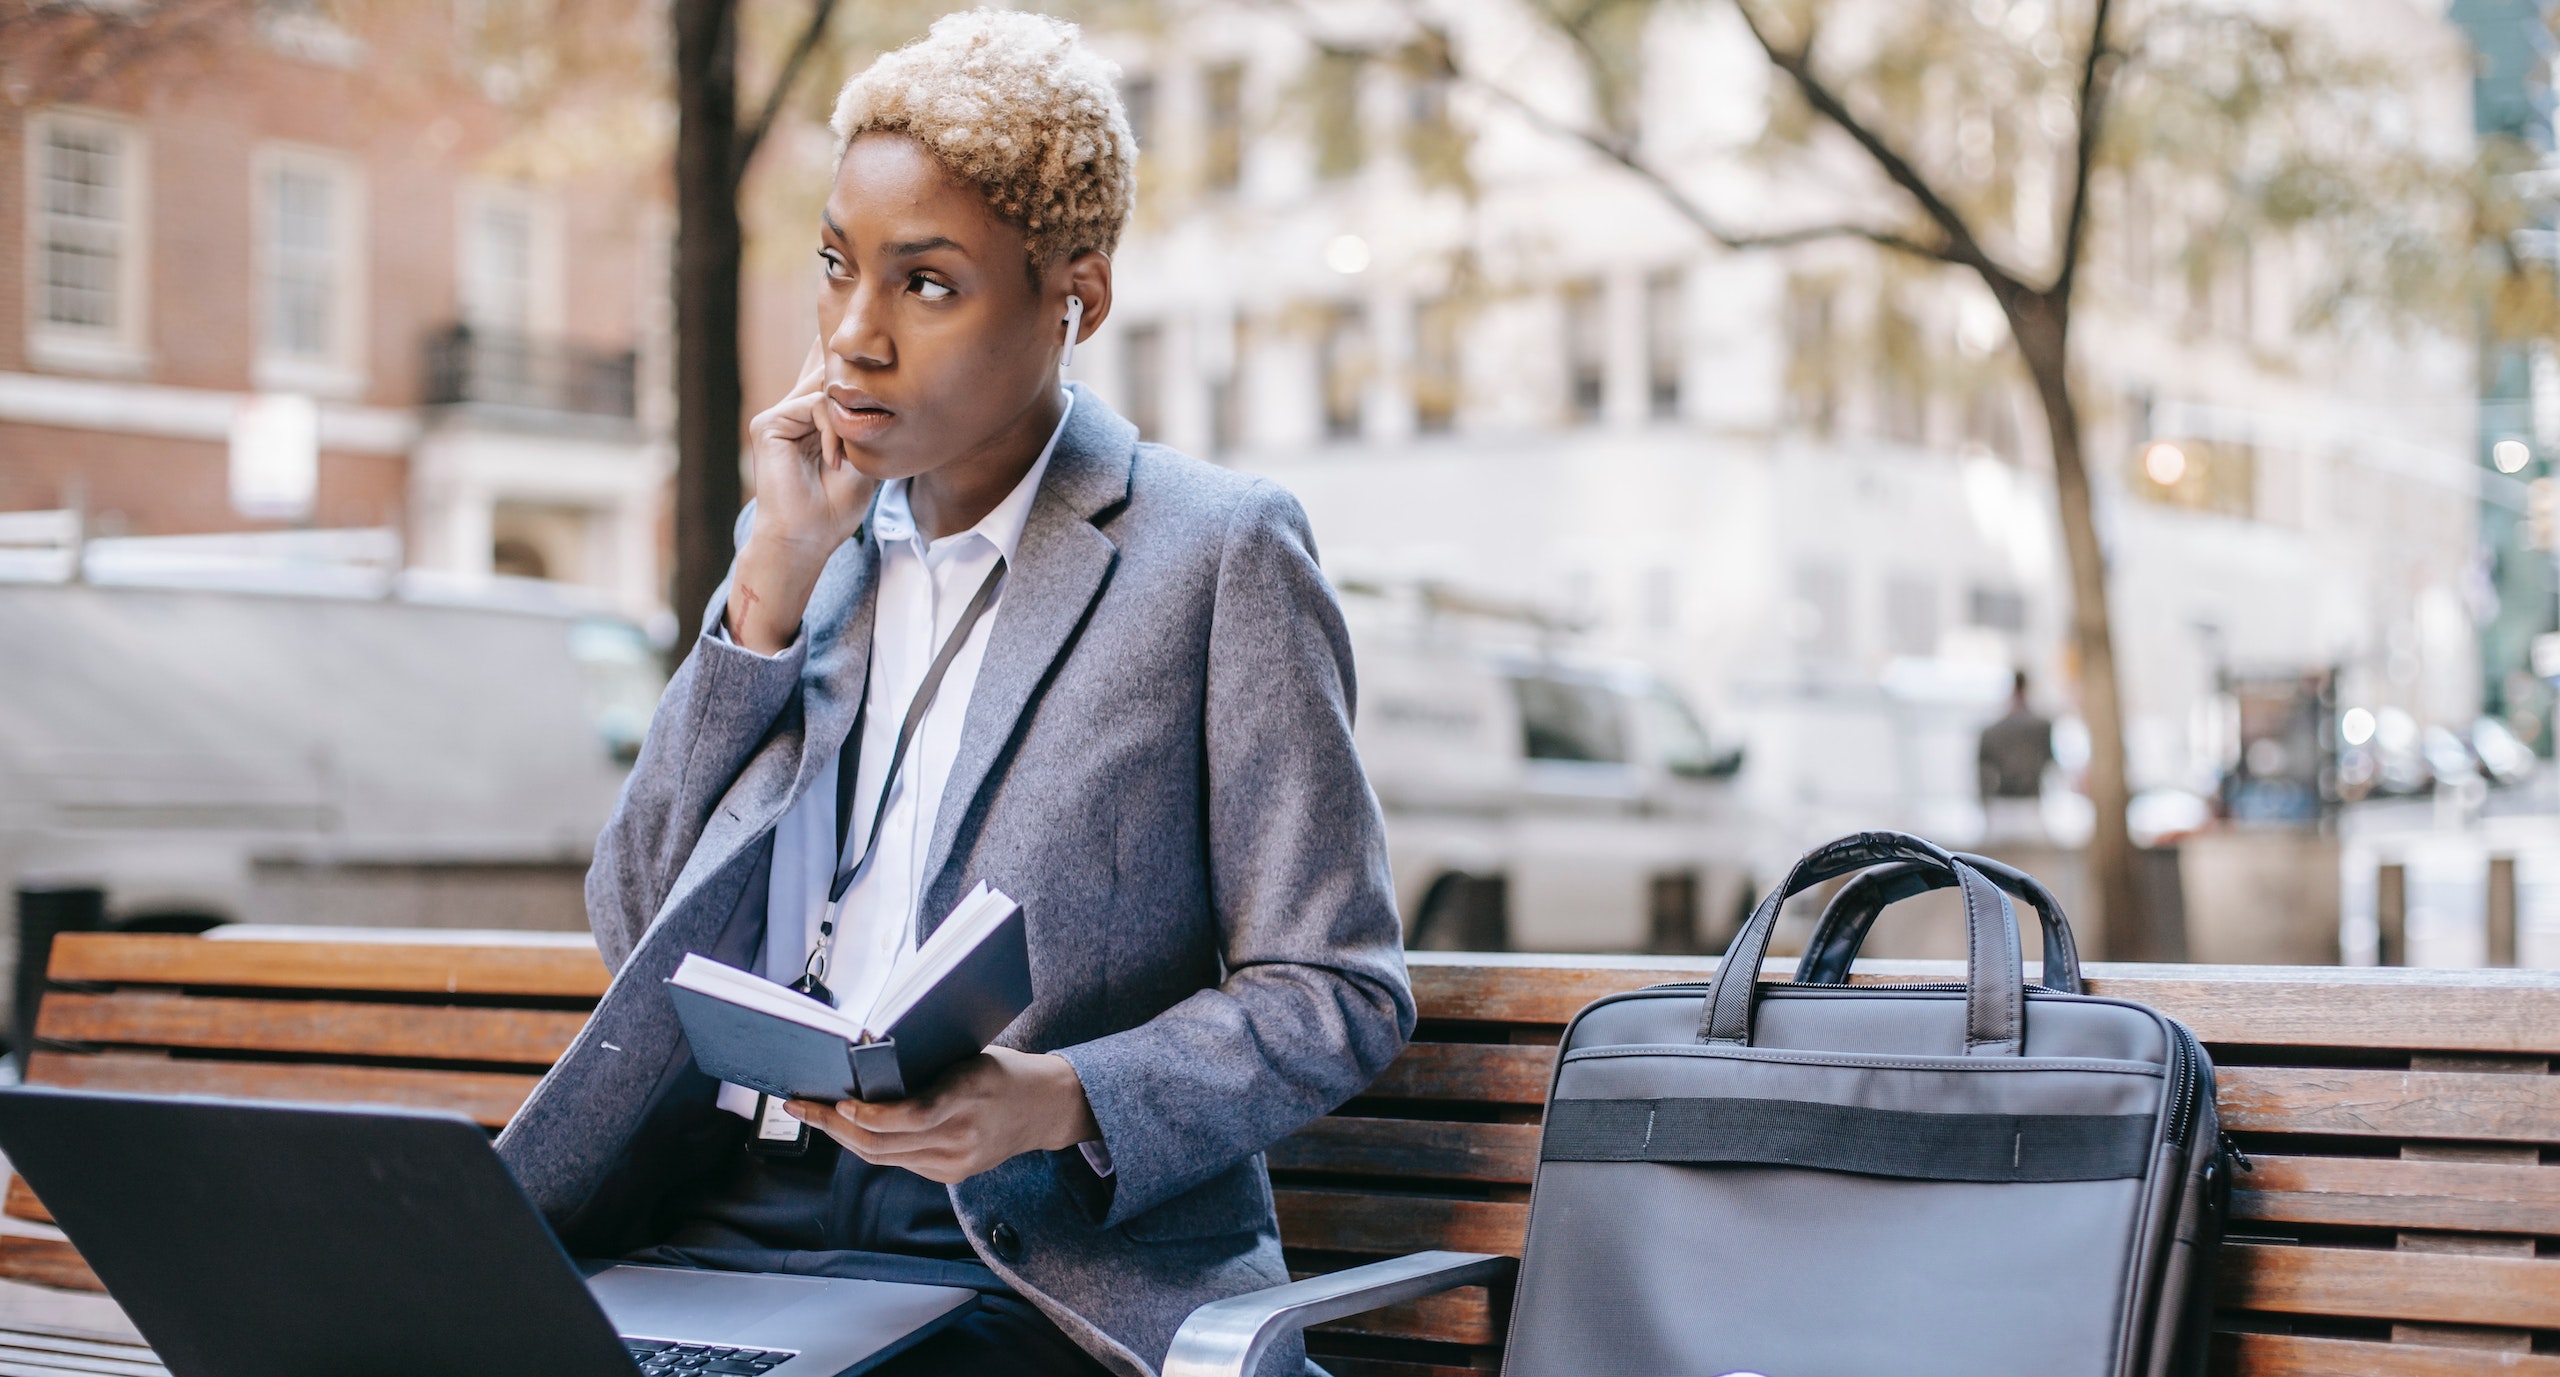 Business woman sitting on bench working